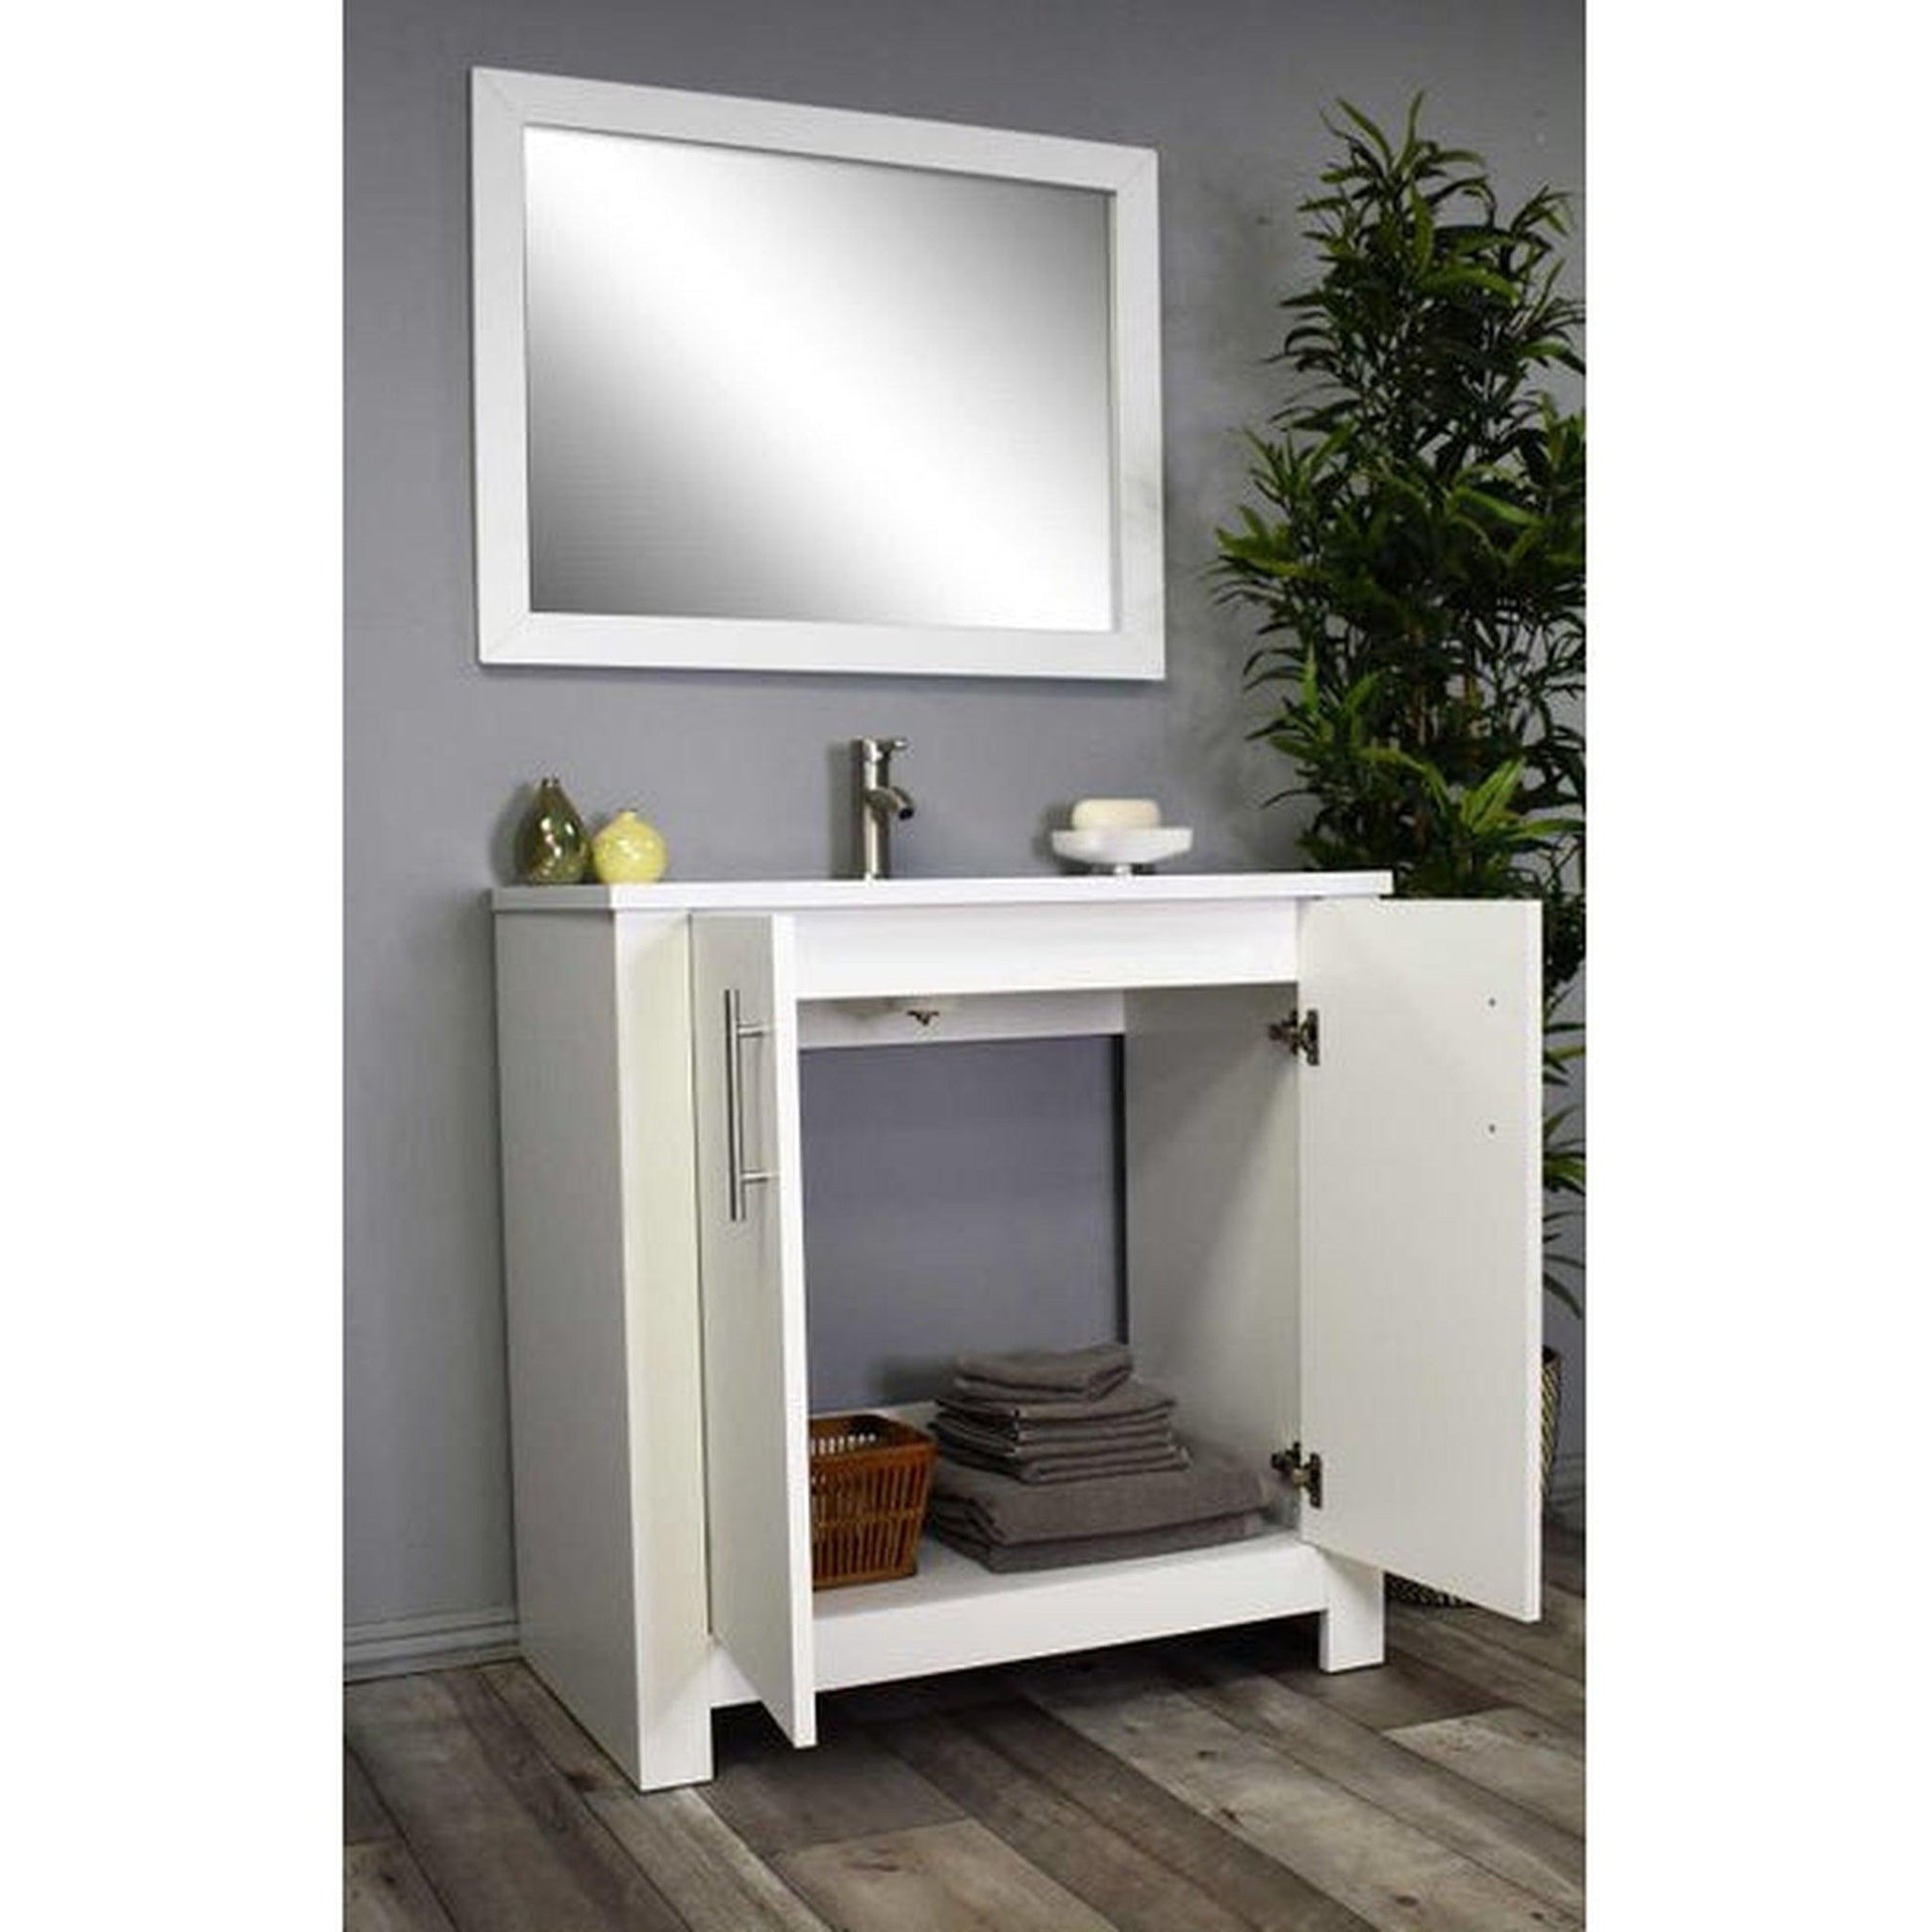 Volpa USA Austin 36" x 20" Glossy White Modern Freestanding Bathroom Vanity With Acrylic Top, Integrated Acrylic Sink And Brushed Nickel Handles